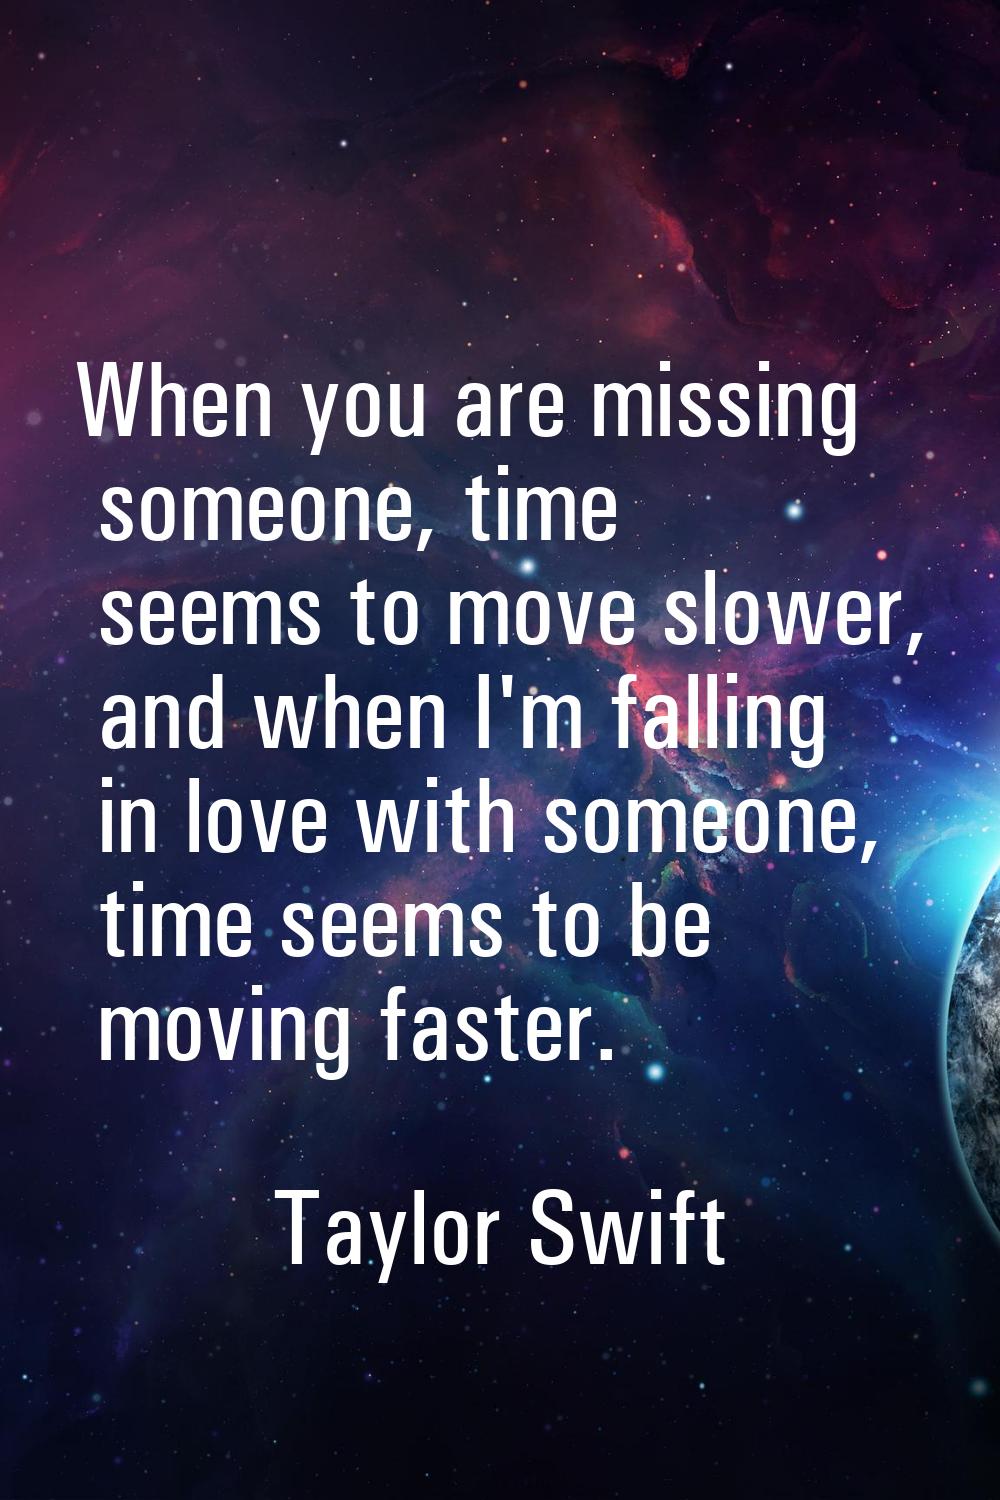 When you are missing someone, time seems to move slower, and when I'm falling in love with someone,